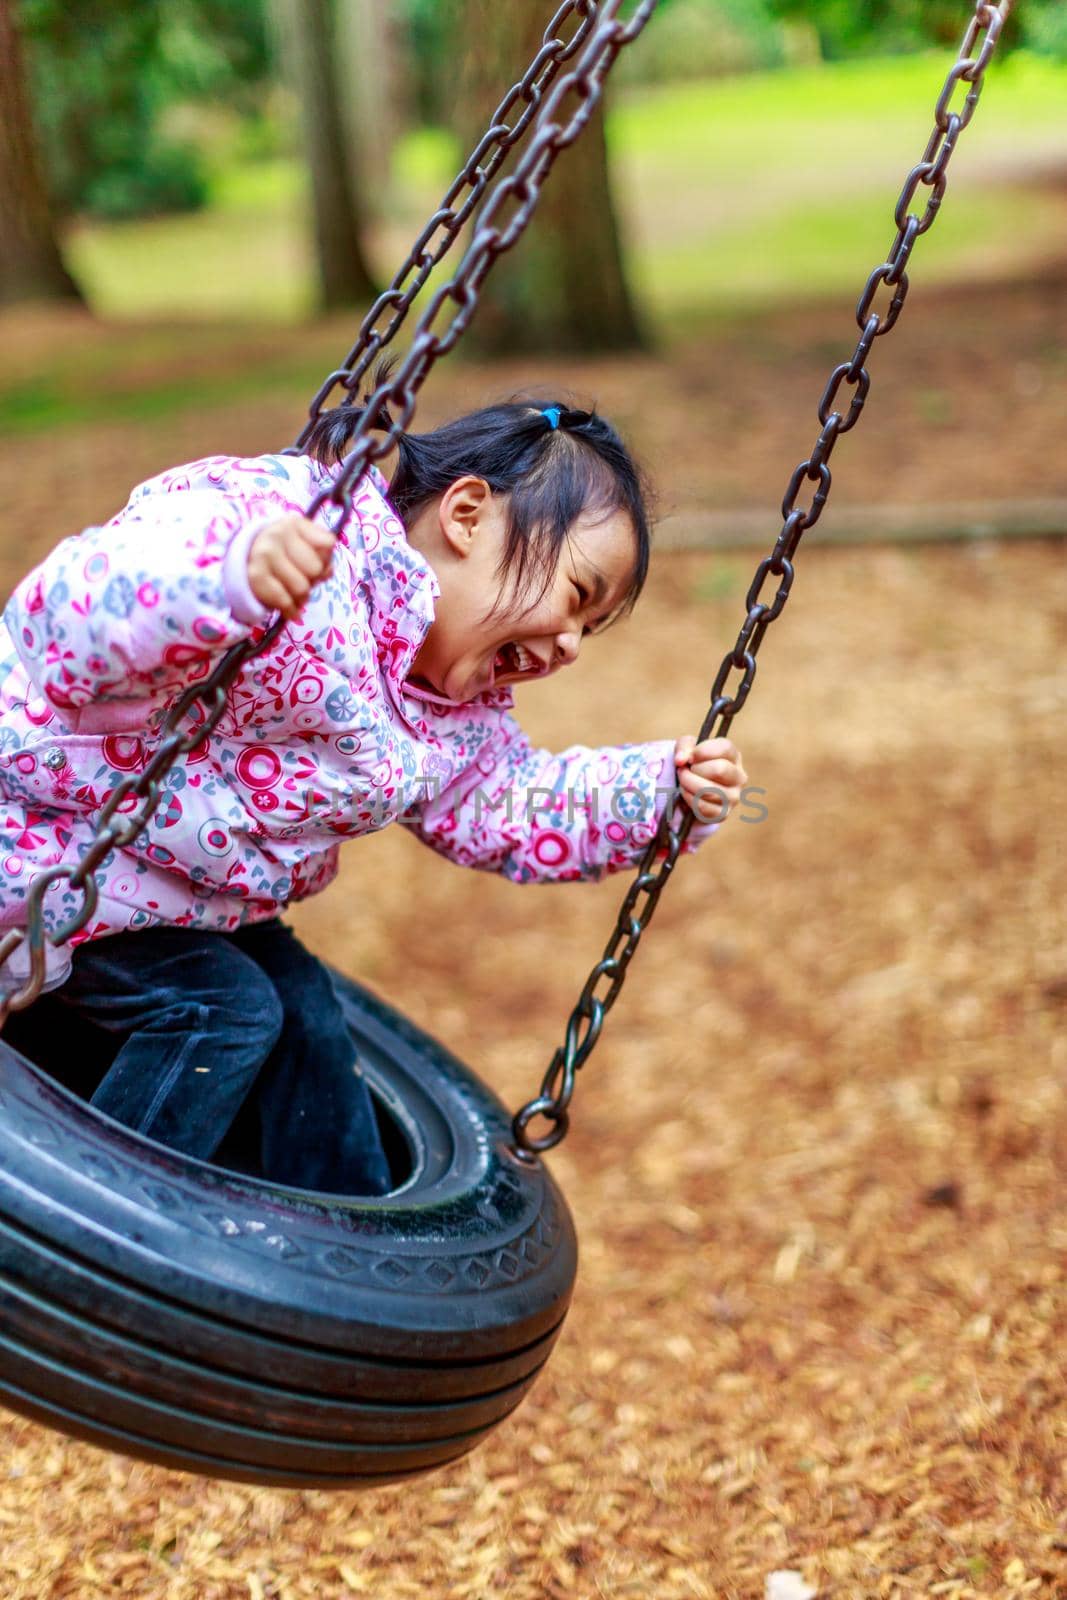 Adorable little girl having a great time on a swing in the playground.